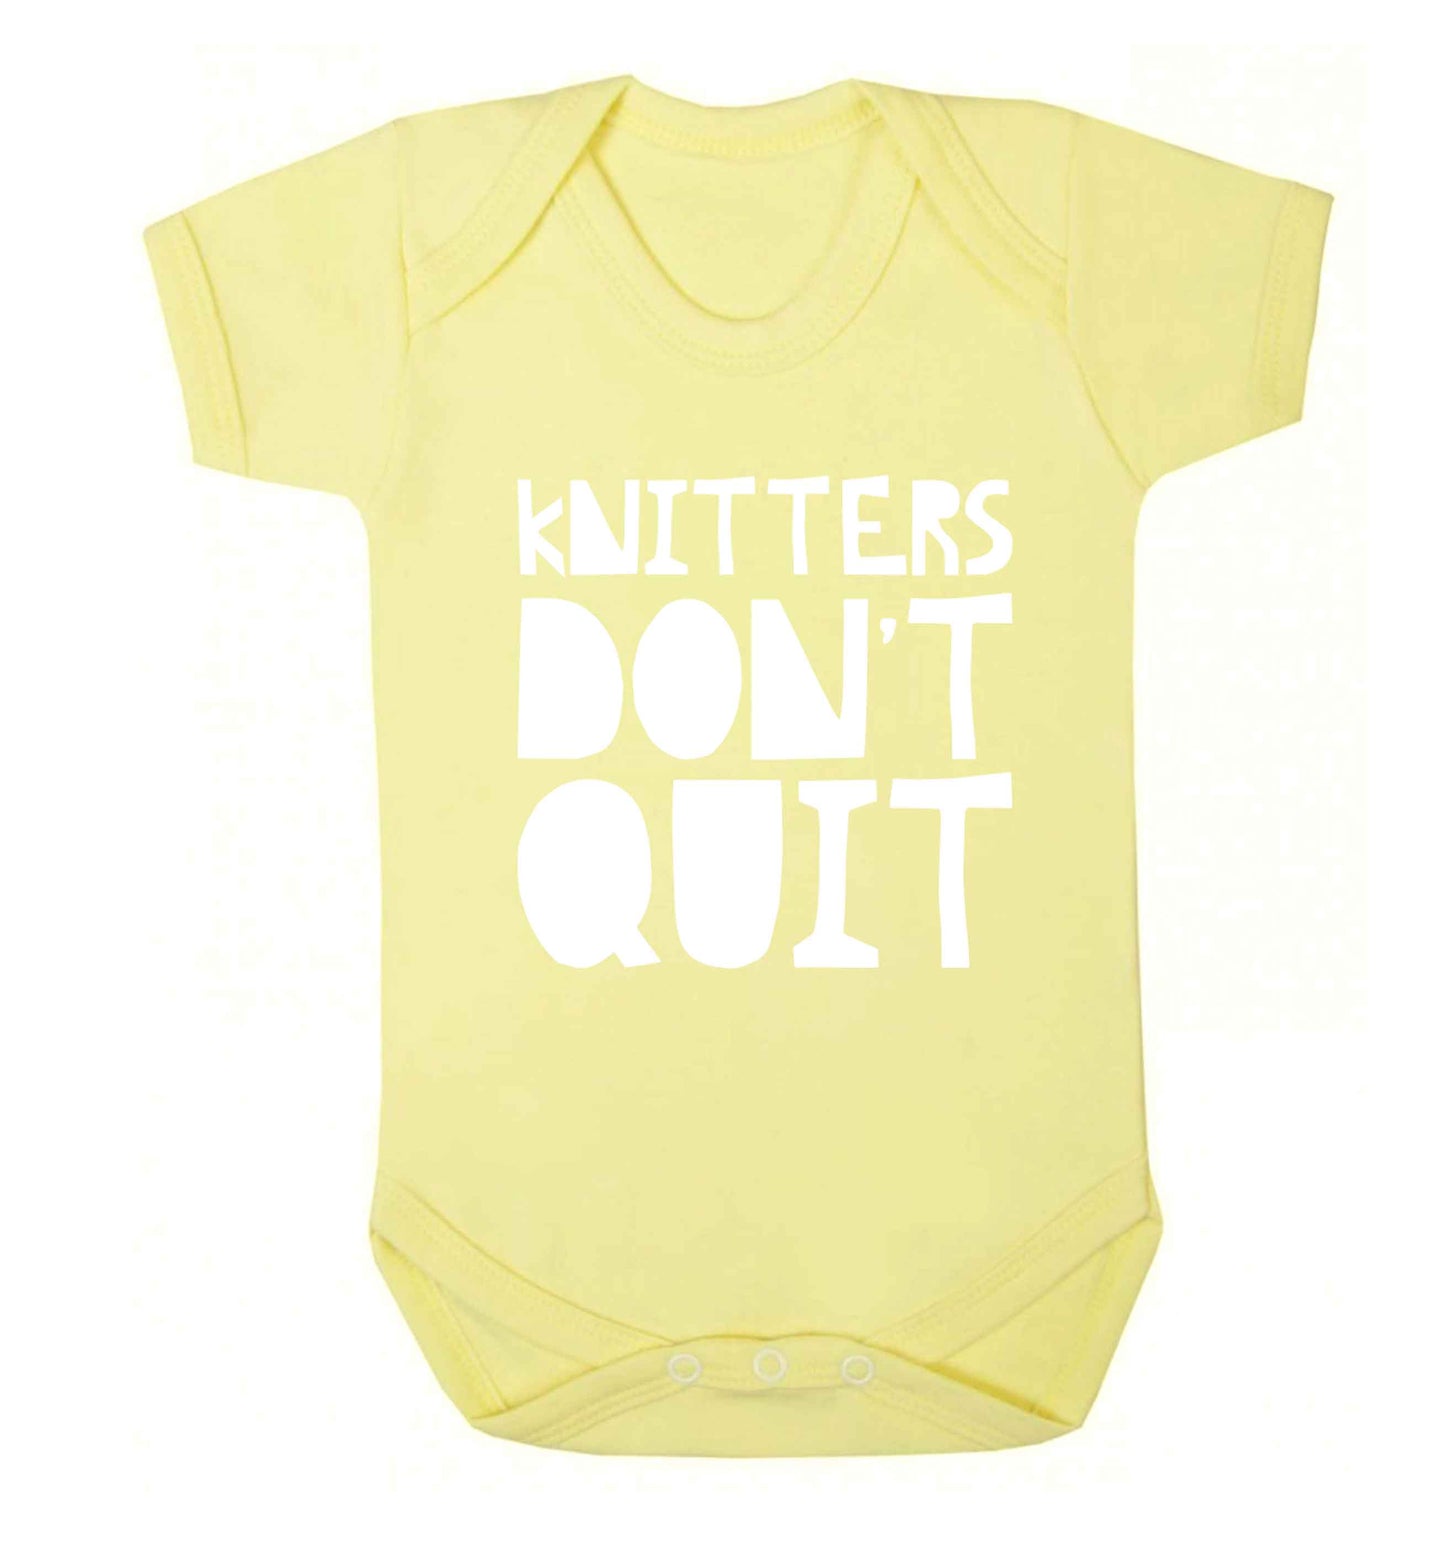 Knitters don't quit Baby Vest pale yellow 18-24 months